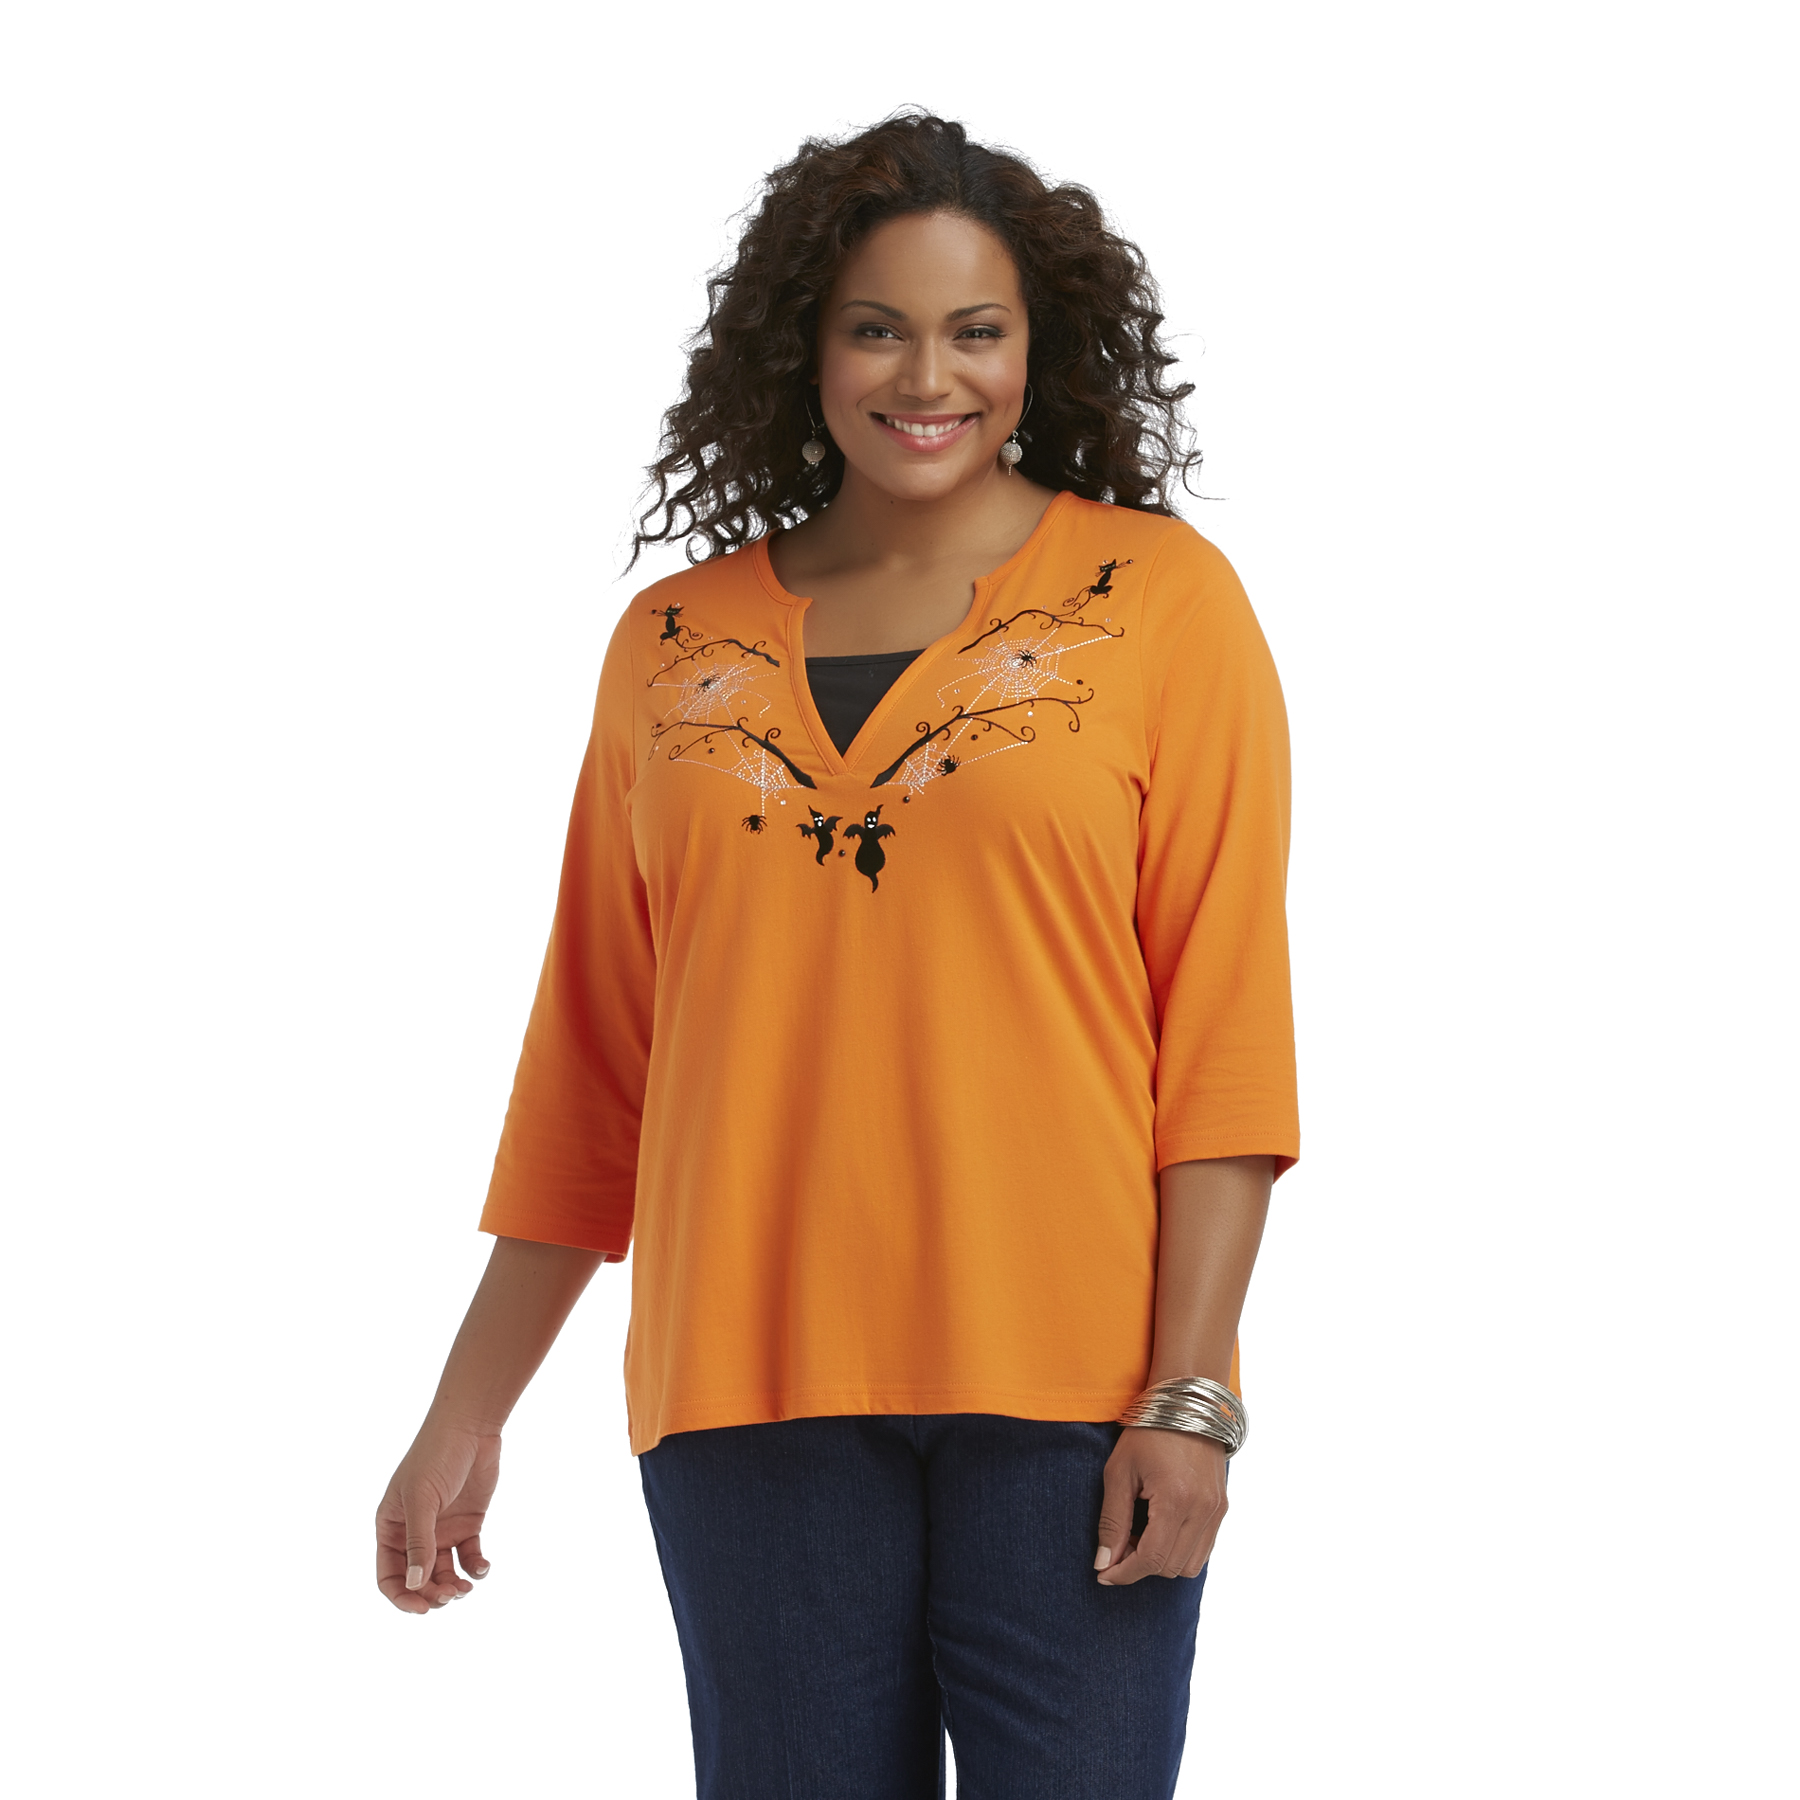 Holiday Editions Women's Plus Halloween T-Shirt - Layered Look